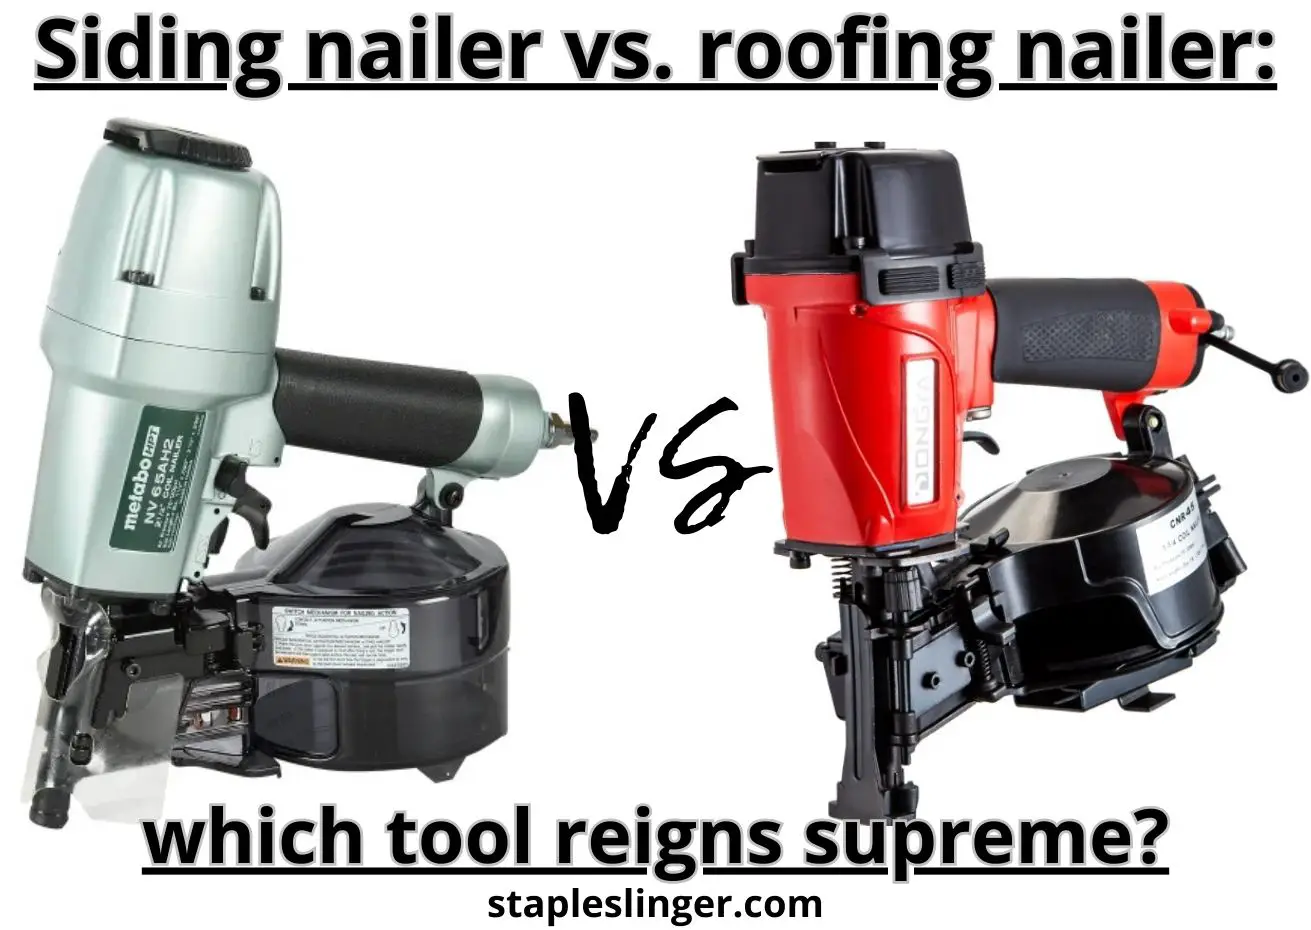 Siding nailer vs roofing nailer: which is the best?